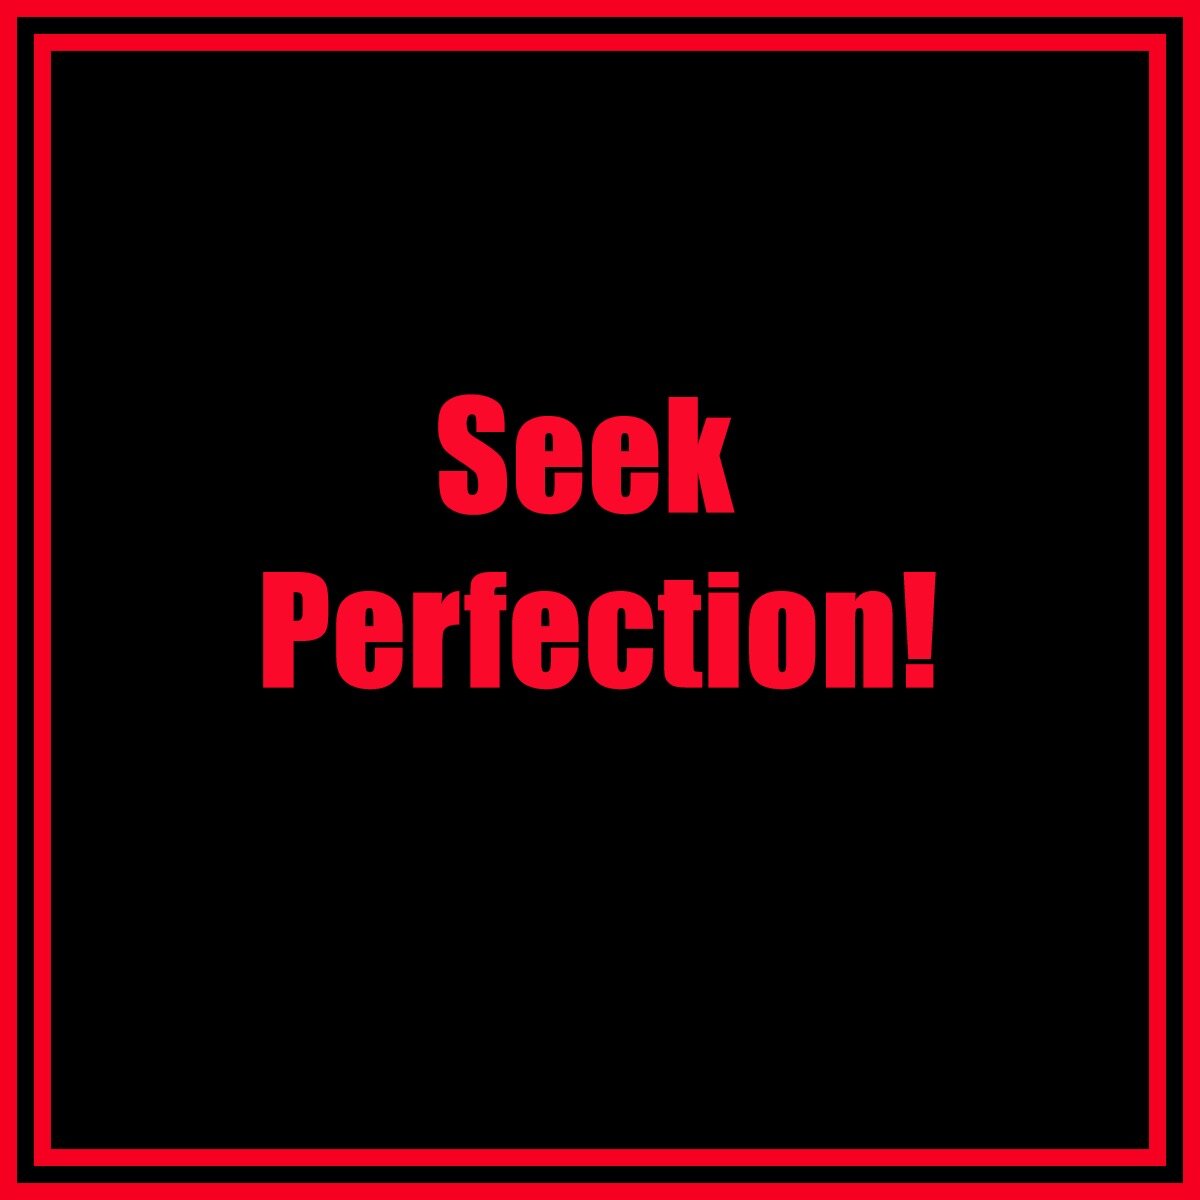 About Perfect Play – PerfectPlay